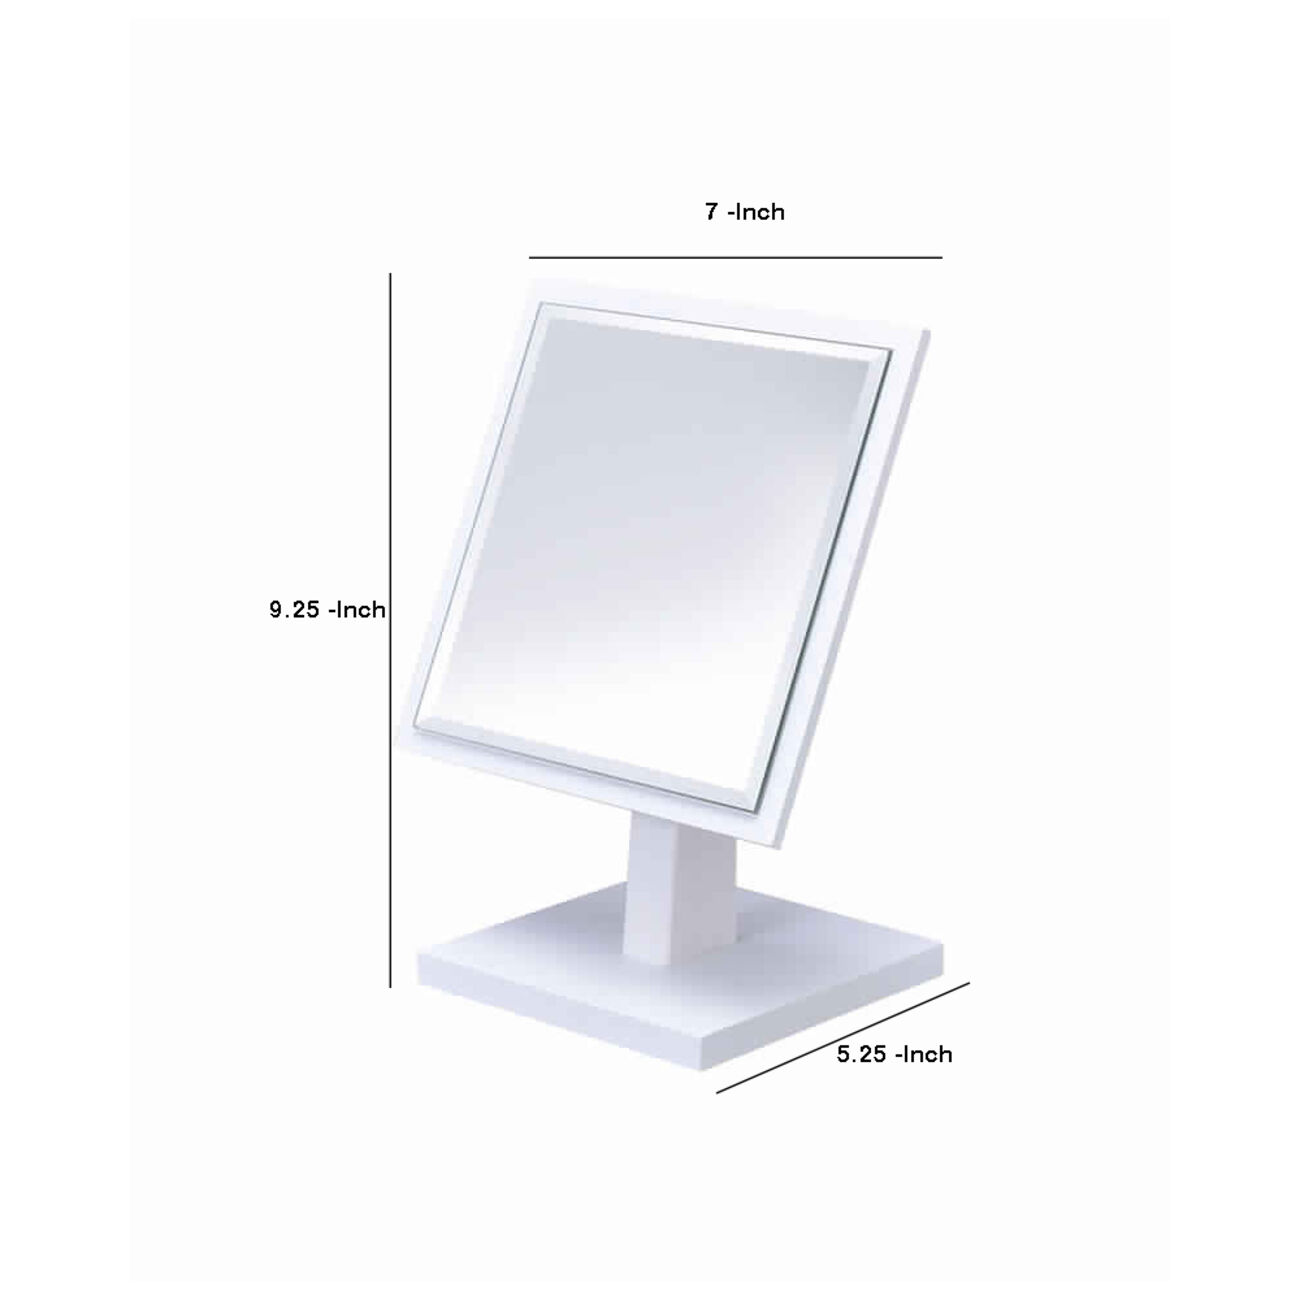 Square Makeup Mirror with Wooden Pedestal Base, White and Silver